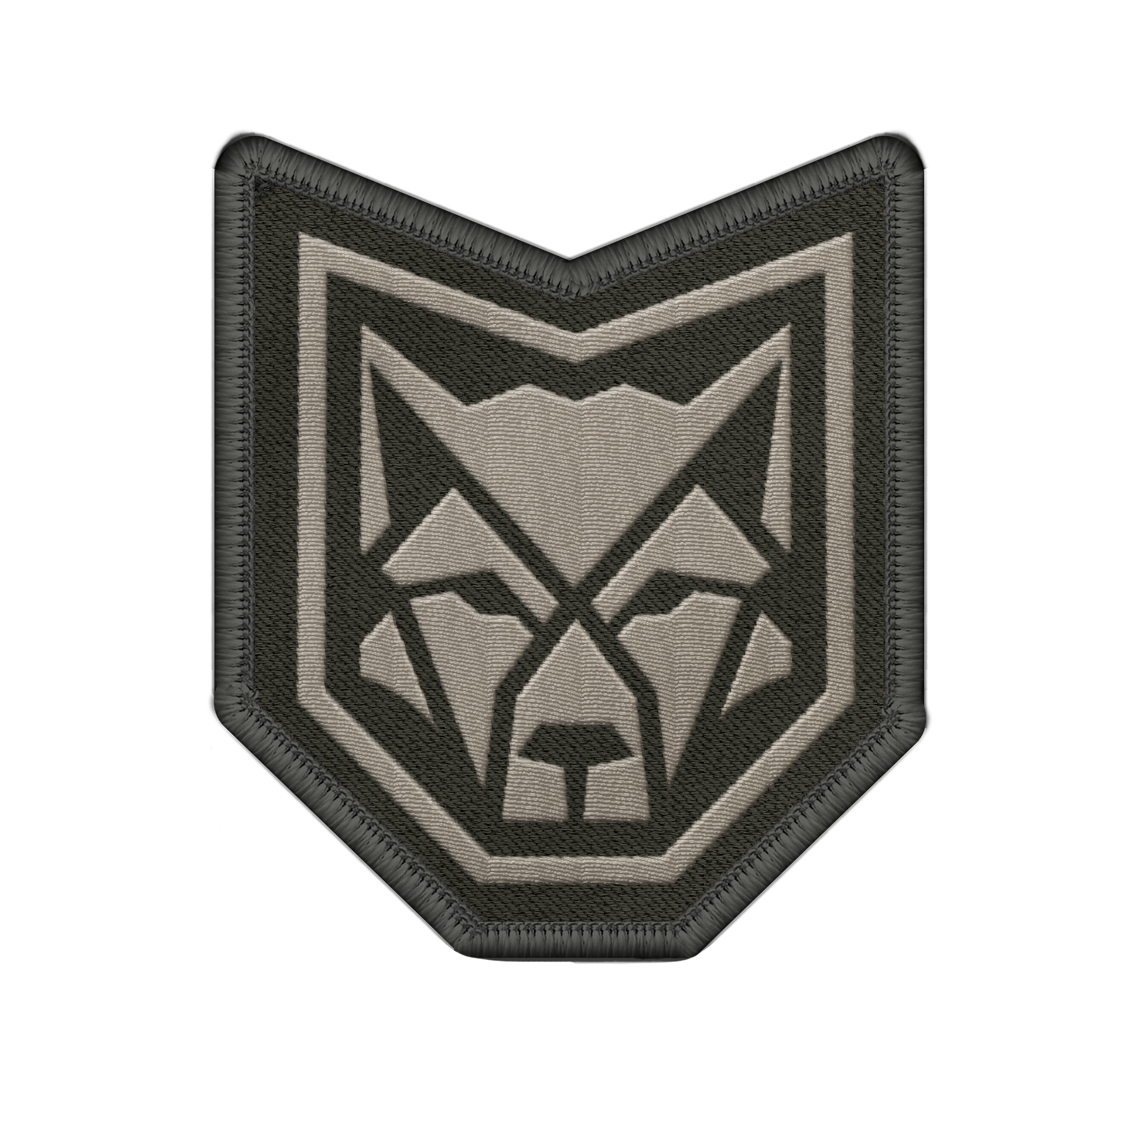 CANIS Wolf Logo Patch